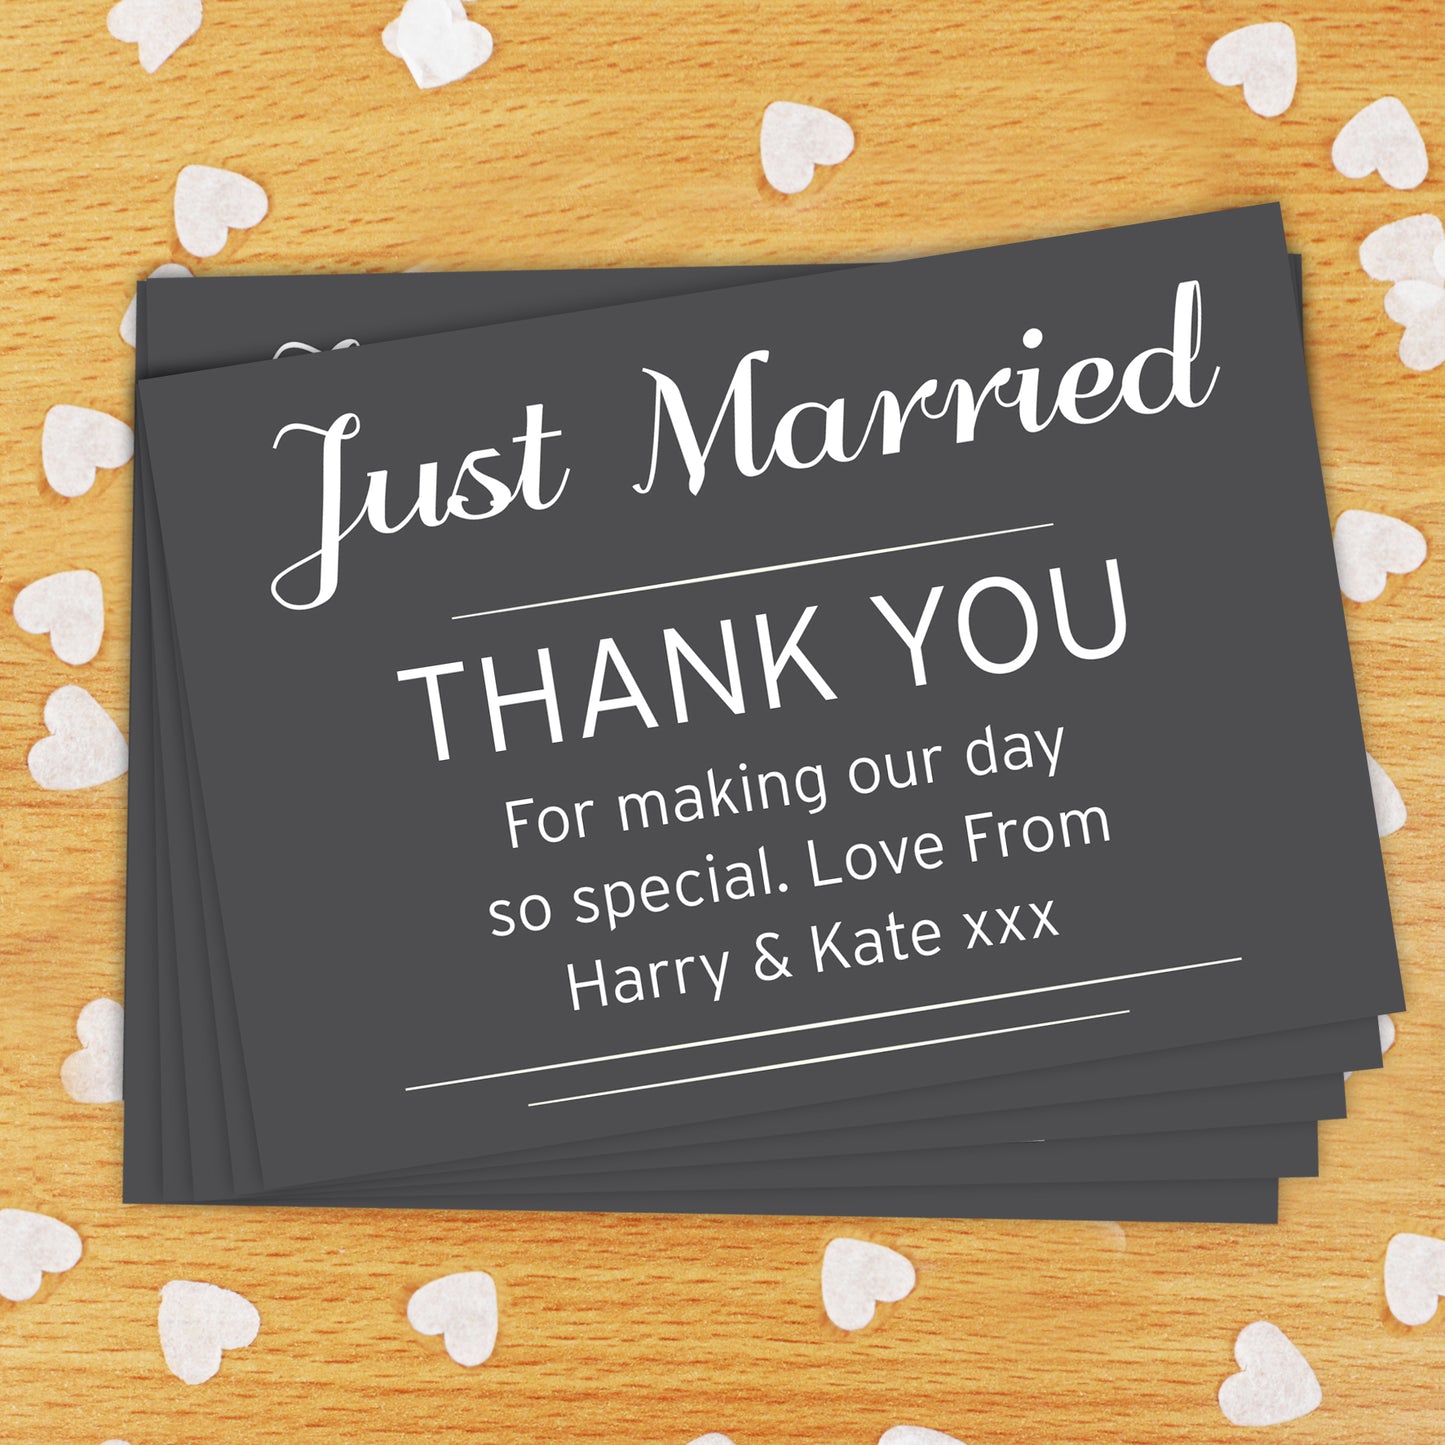 Personalised Classic Wedding Postcards Pack of 24 - Personalise It!